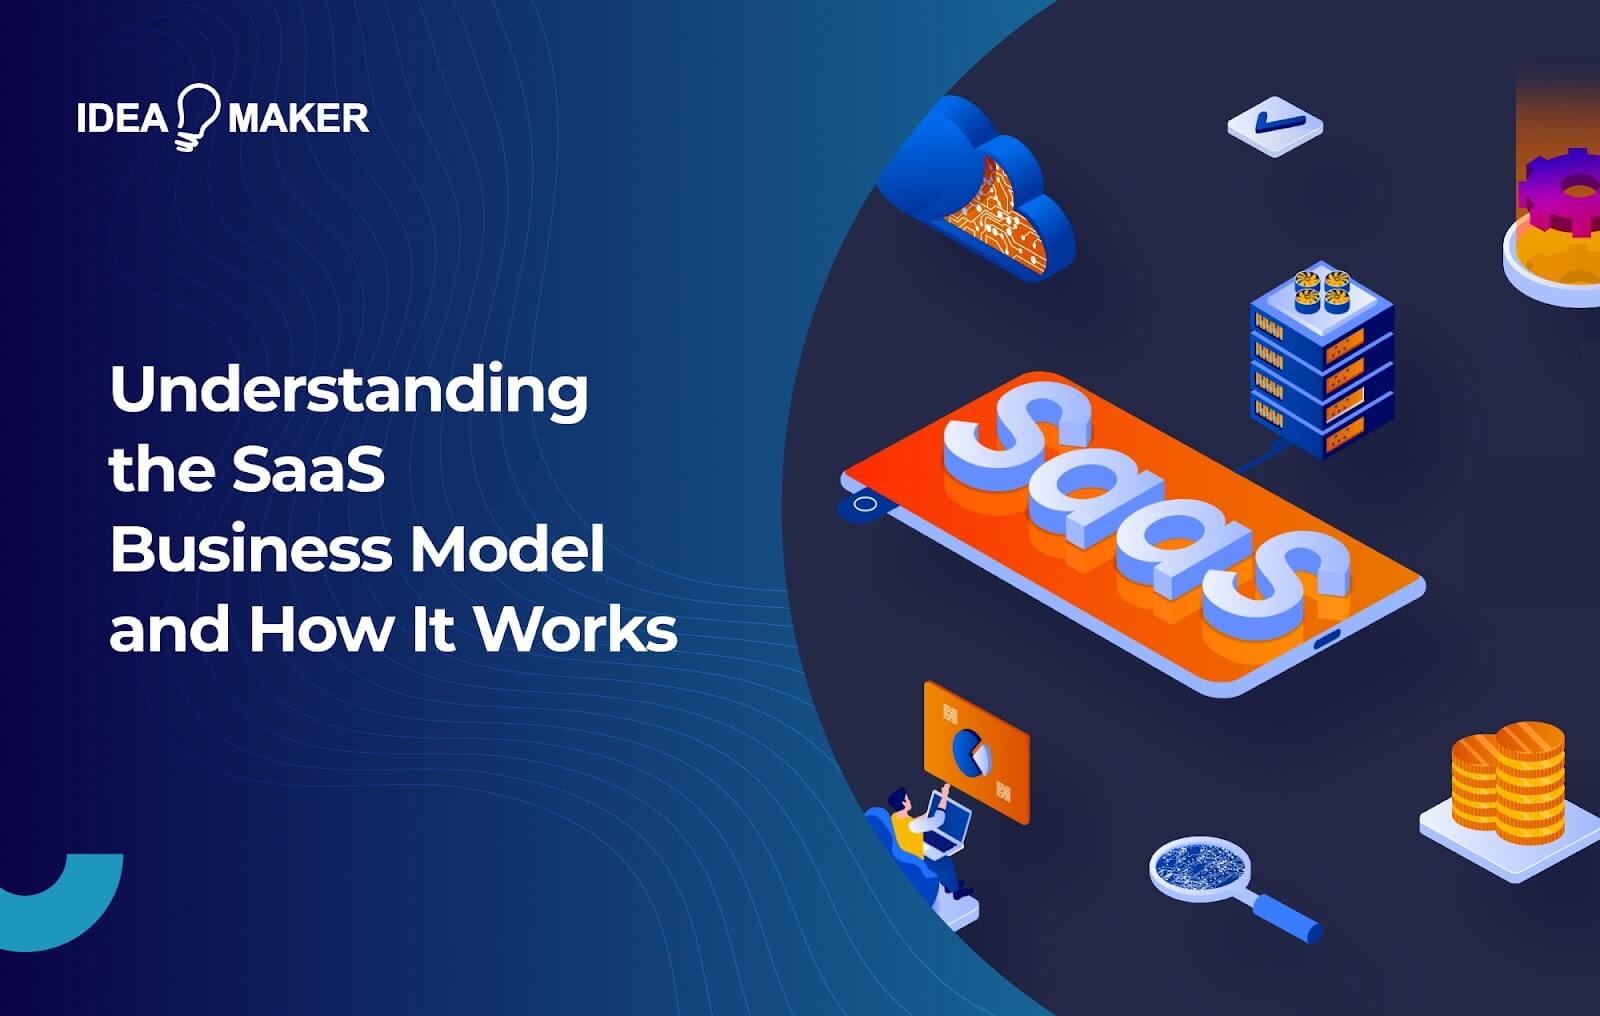 Ideamaker - Understanding the SaaS Business Model and How It Works